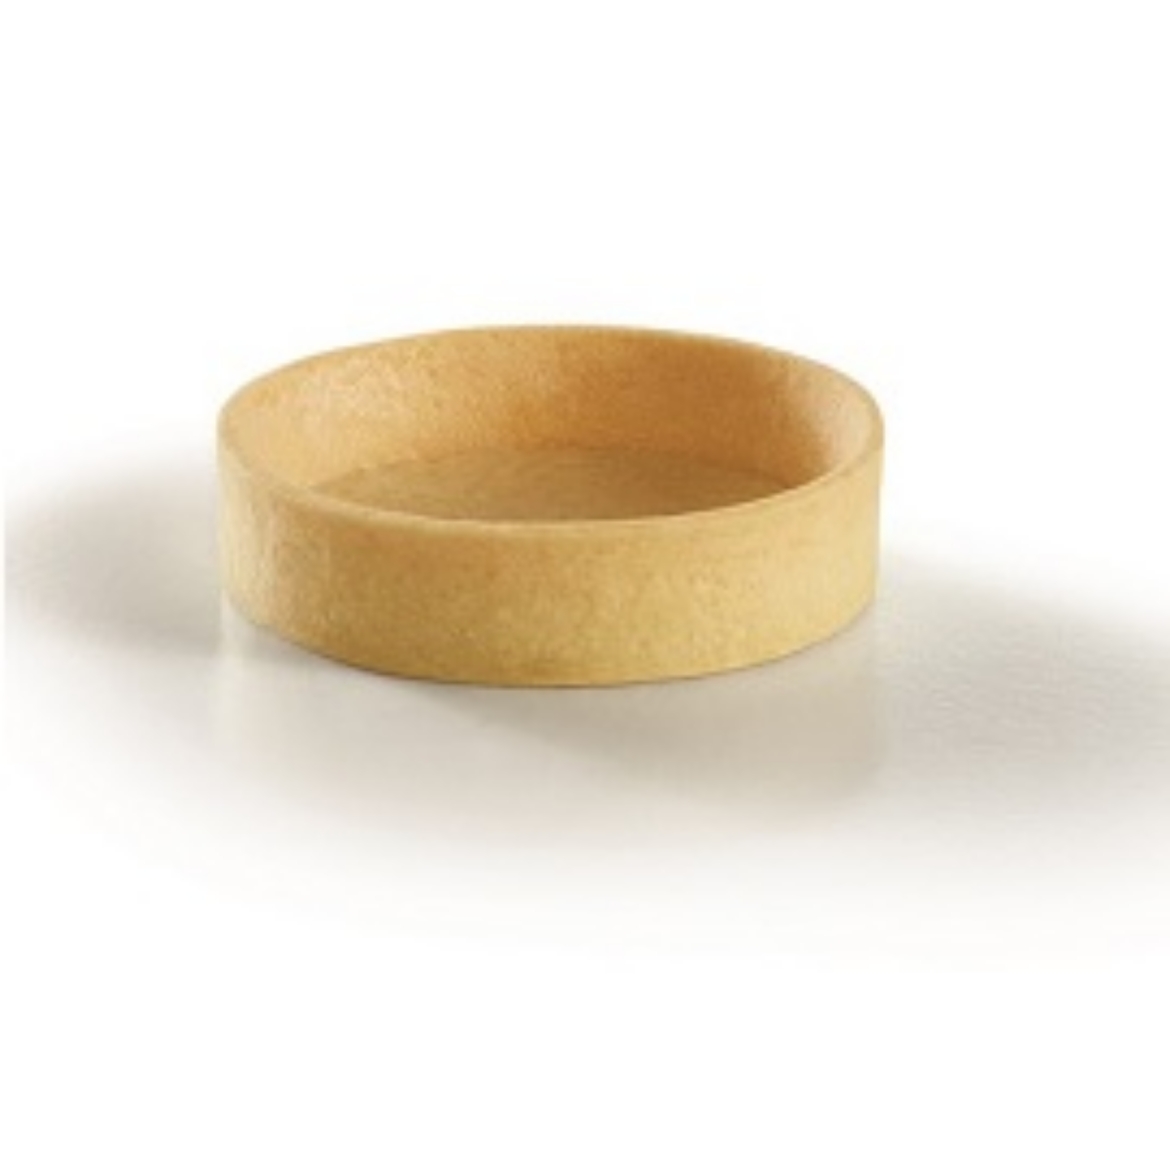 Picture of BSS80 54s R/B 80mm BAKED ROUND SHORTBREAD SHELL - LARGE (H)